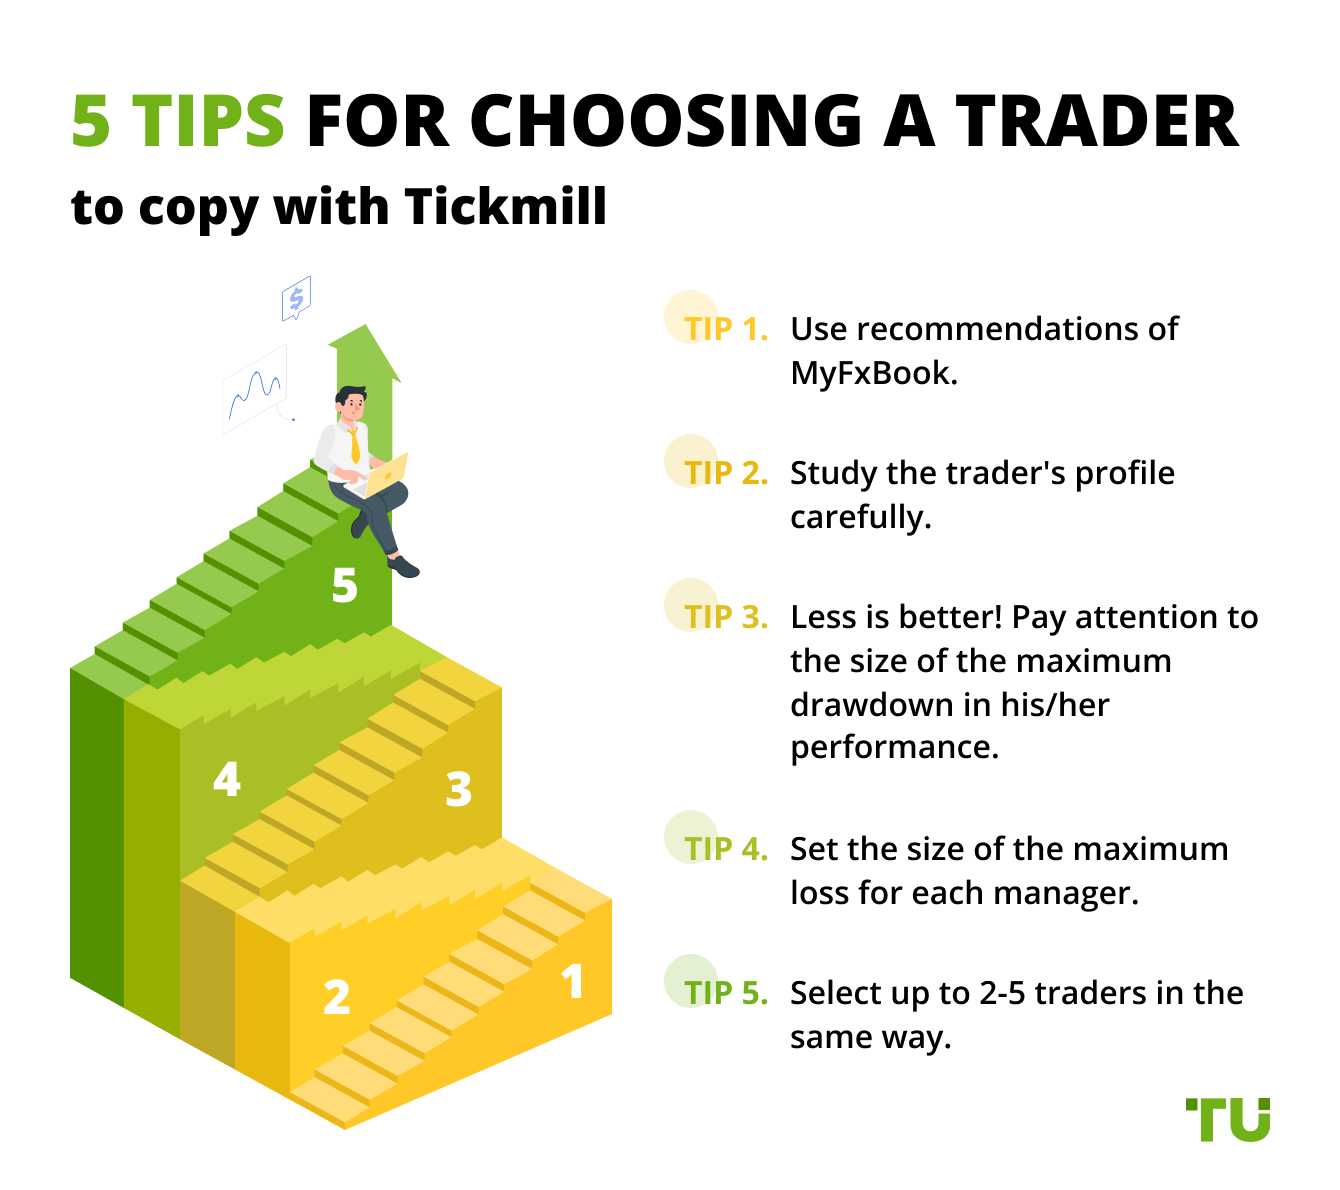 5 tips for choosing a trader to copy with Tickmill